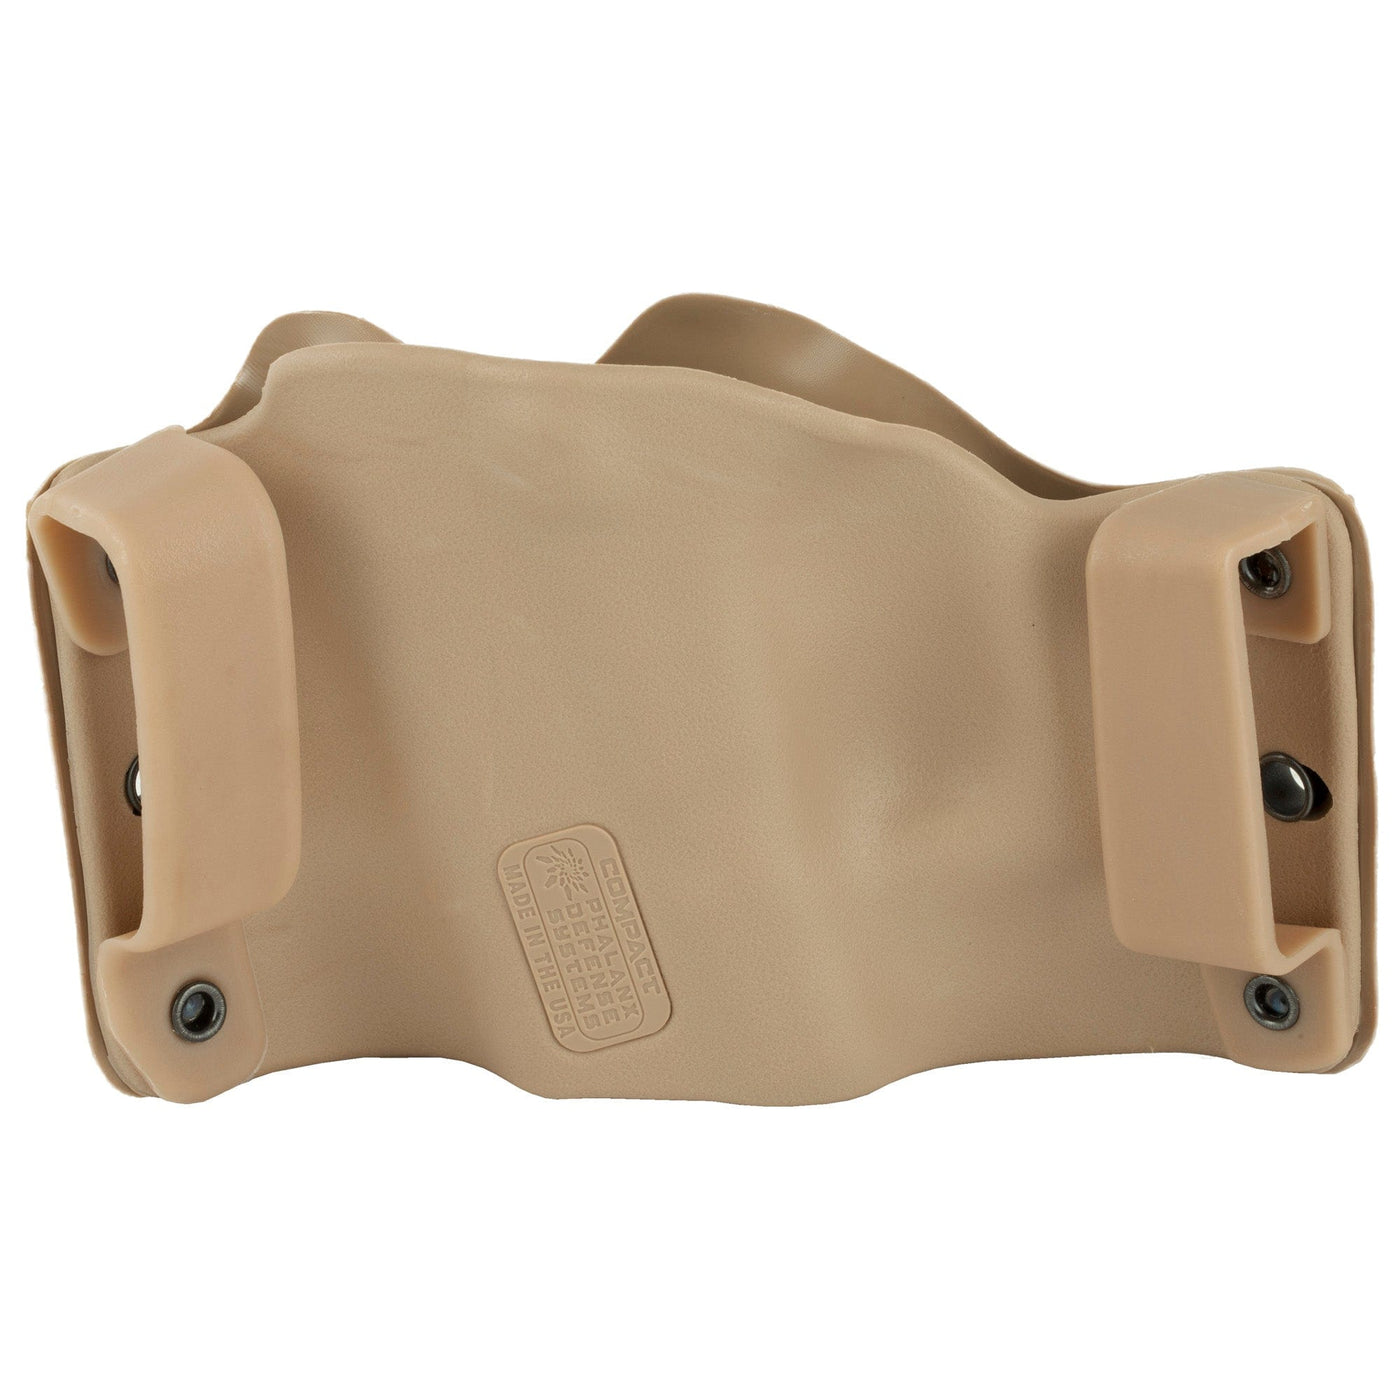 Stealth Operator Holster Stealth Operator Compact Owb - Rh Holster Coyote Open Bottom Holsters